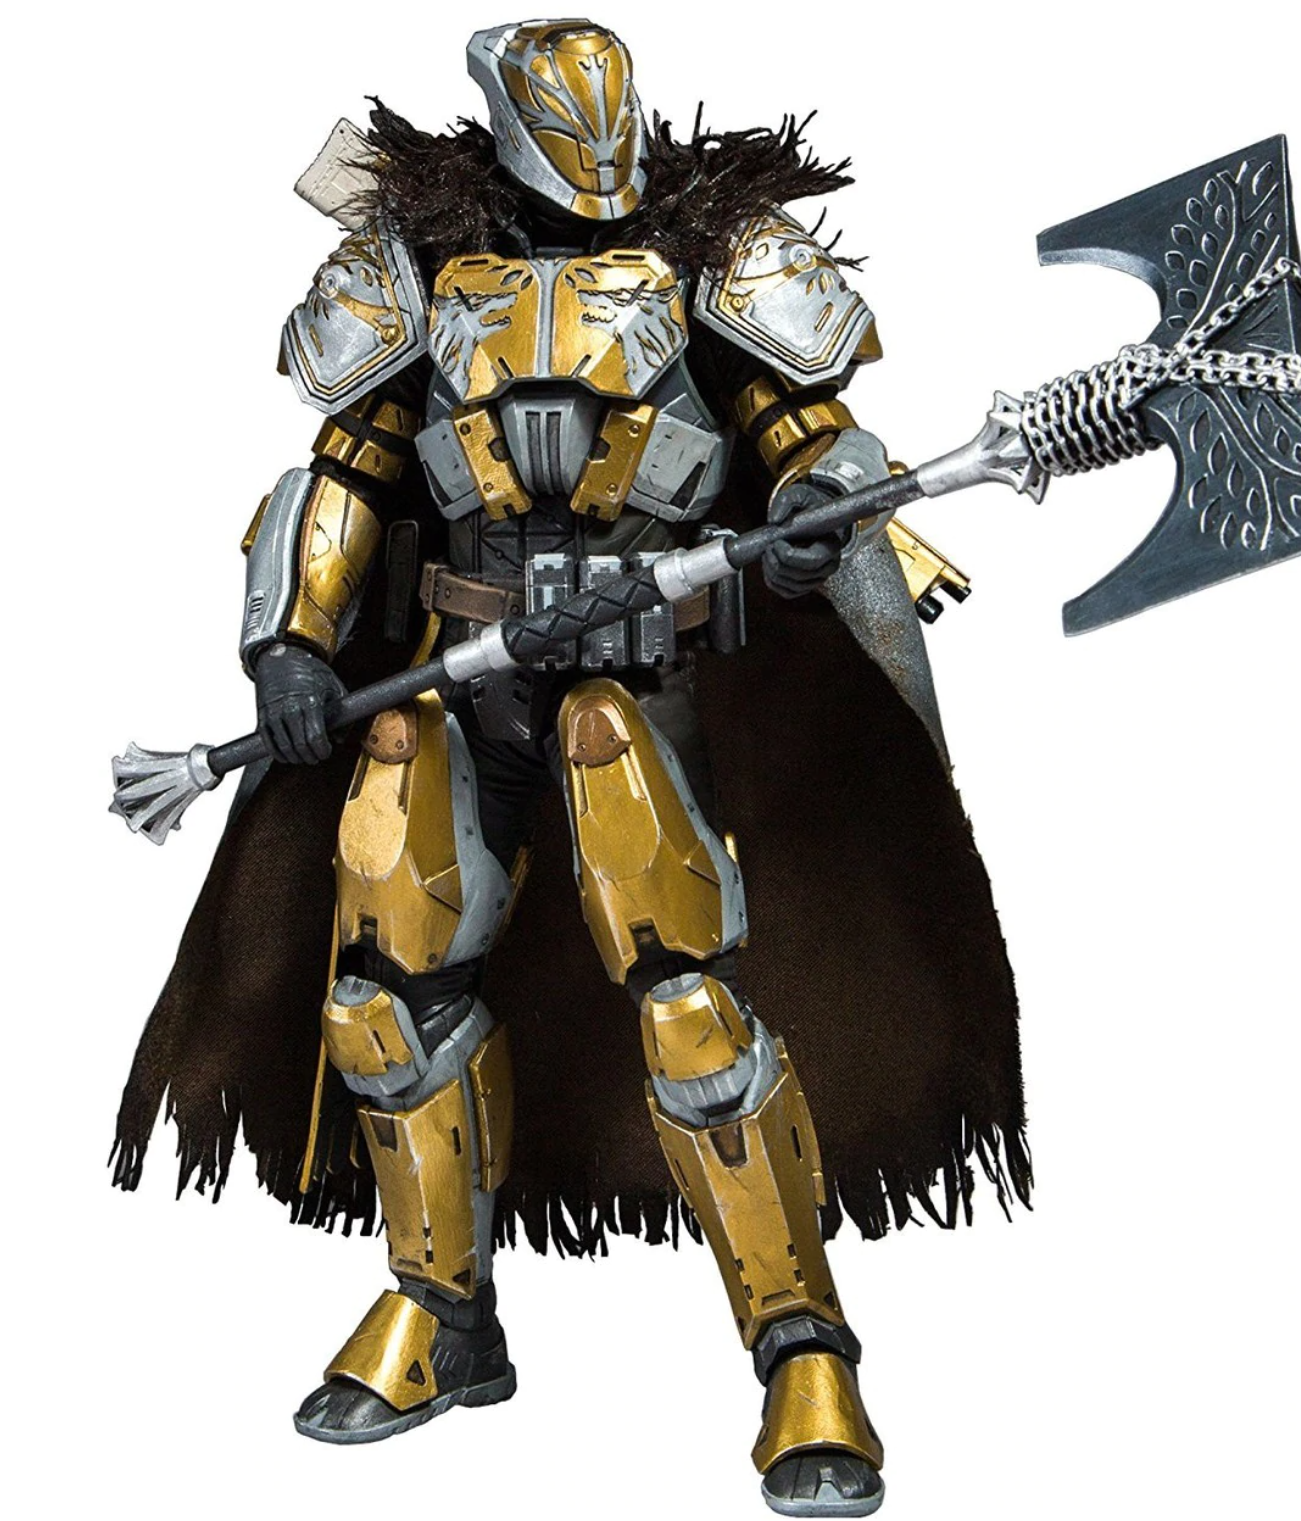 Stumbled across a pretty good Lord Saladin look while messing around with transmog